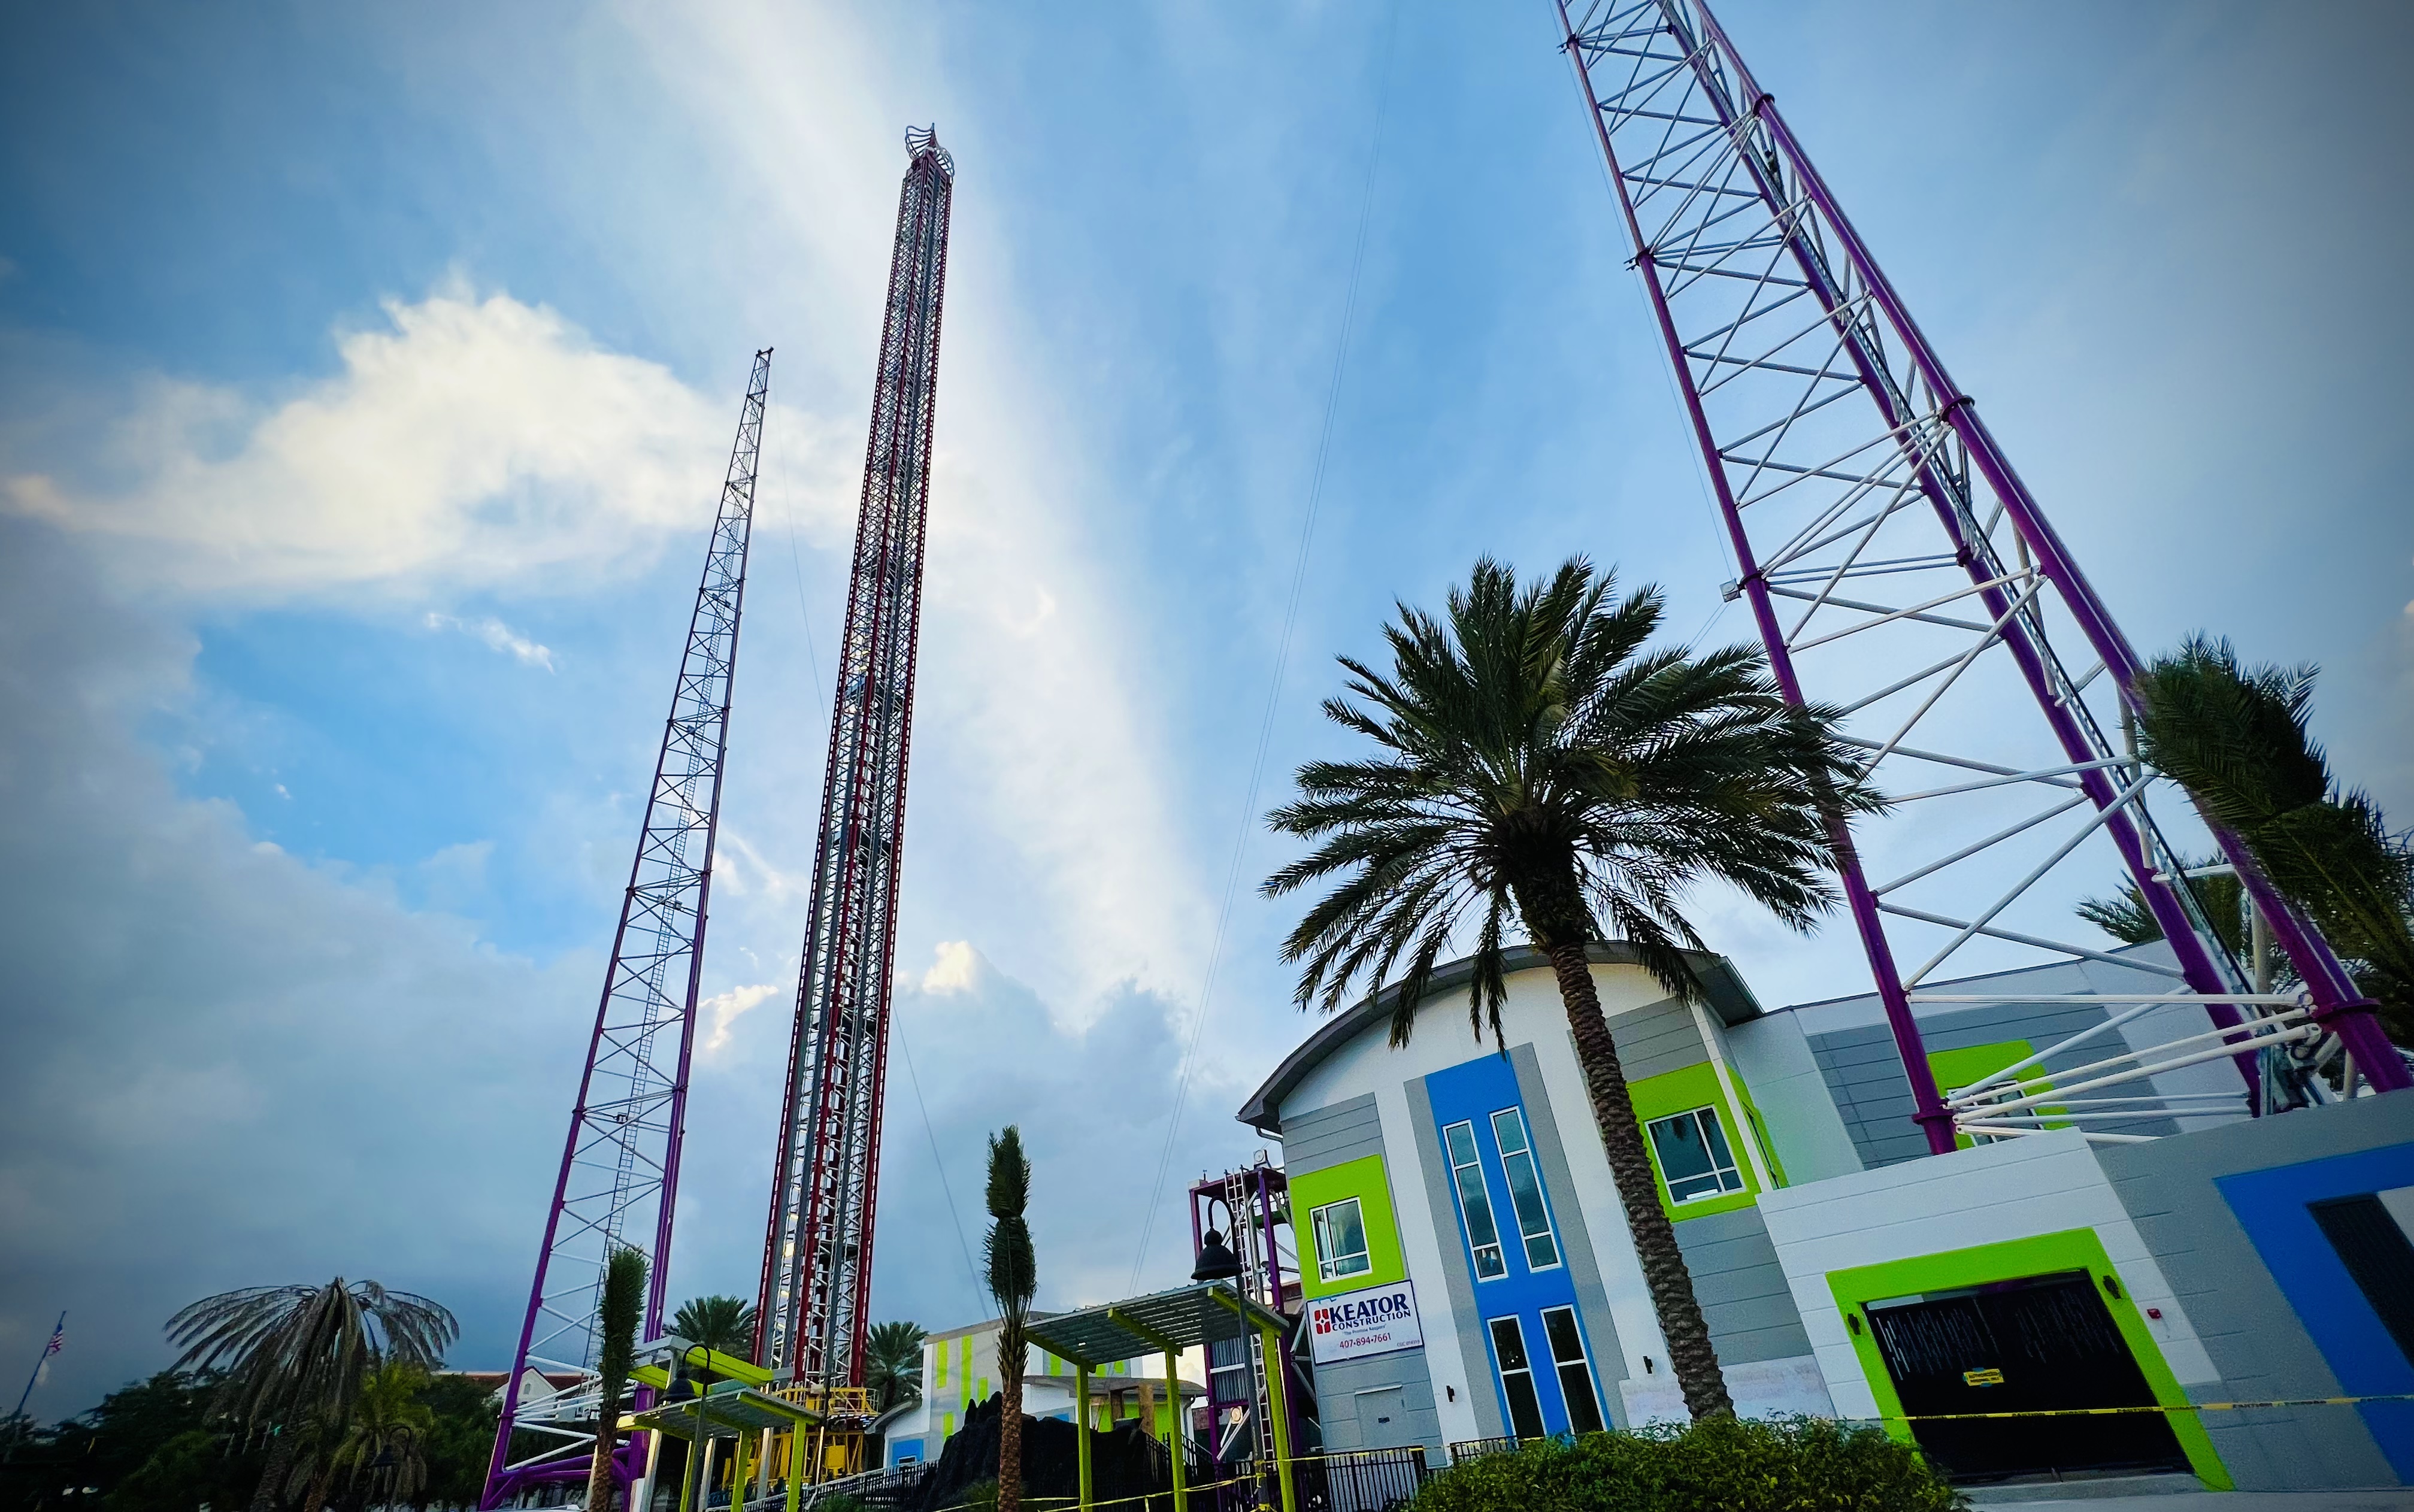 World's tallest drop tower, slingshot now open in Orlando